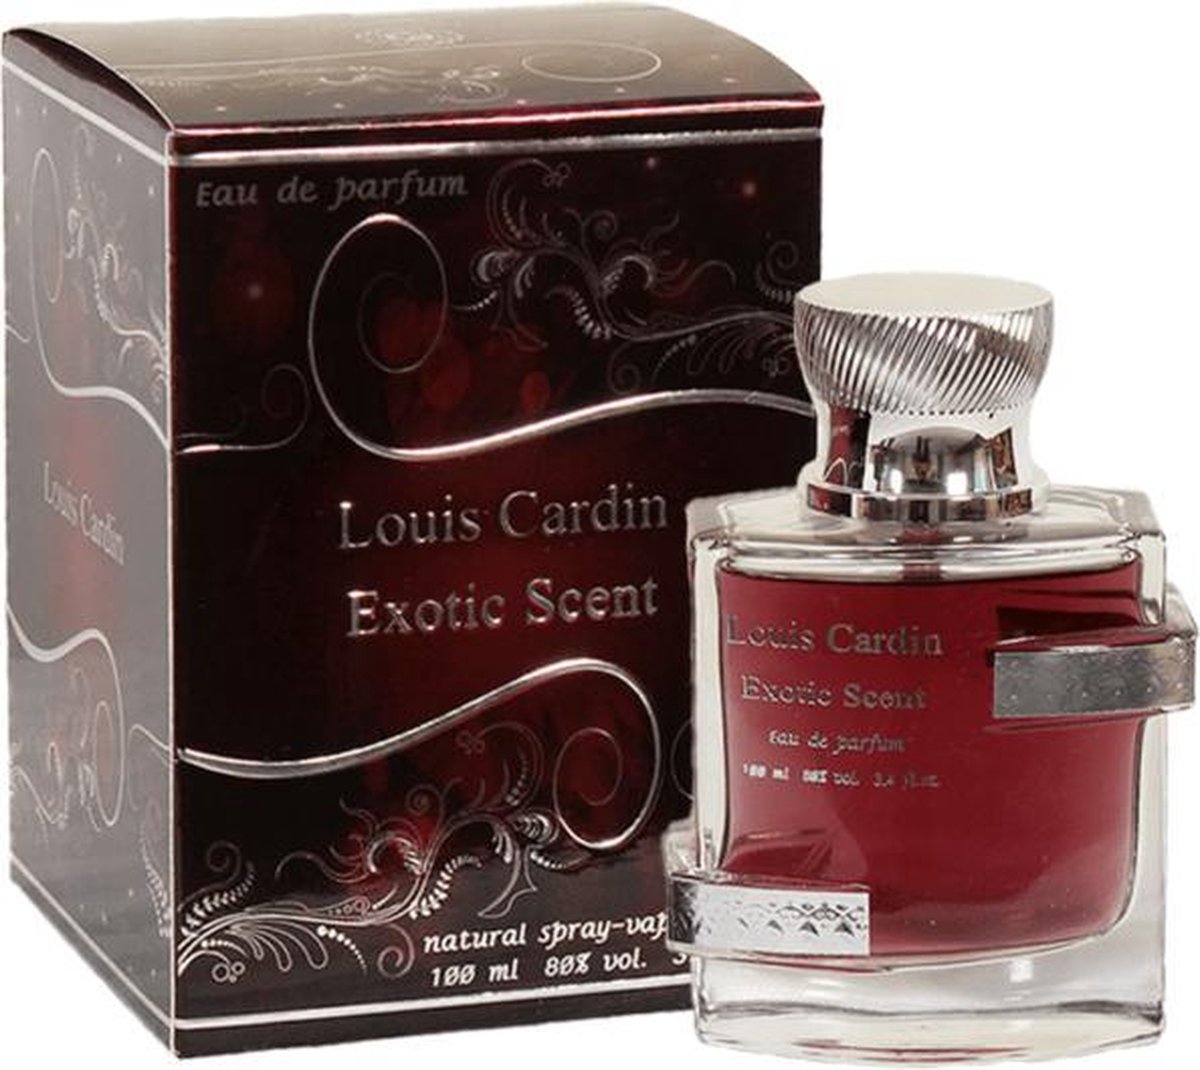 Louis Cardin Excotic Scent EDP for Men 100 ml